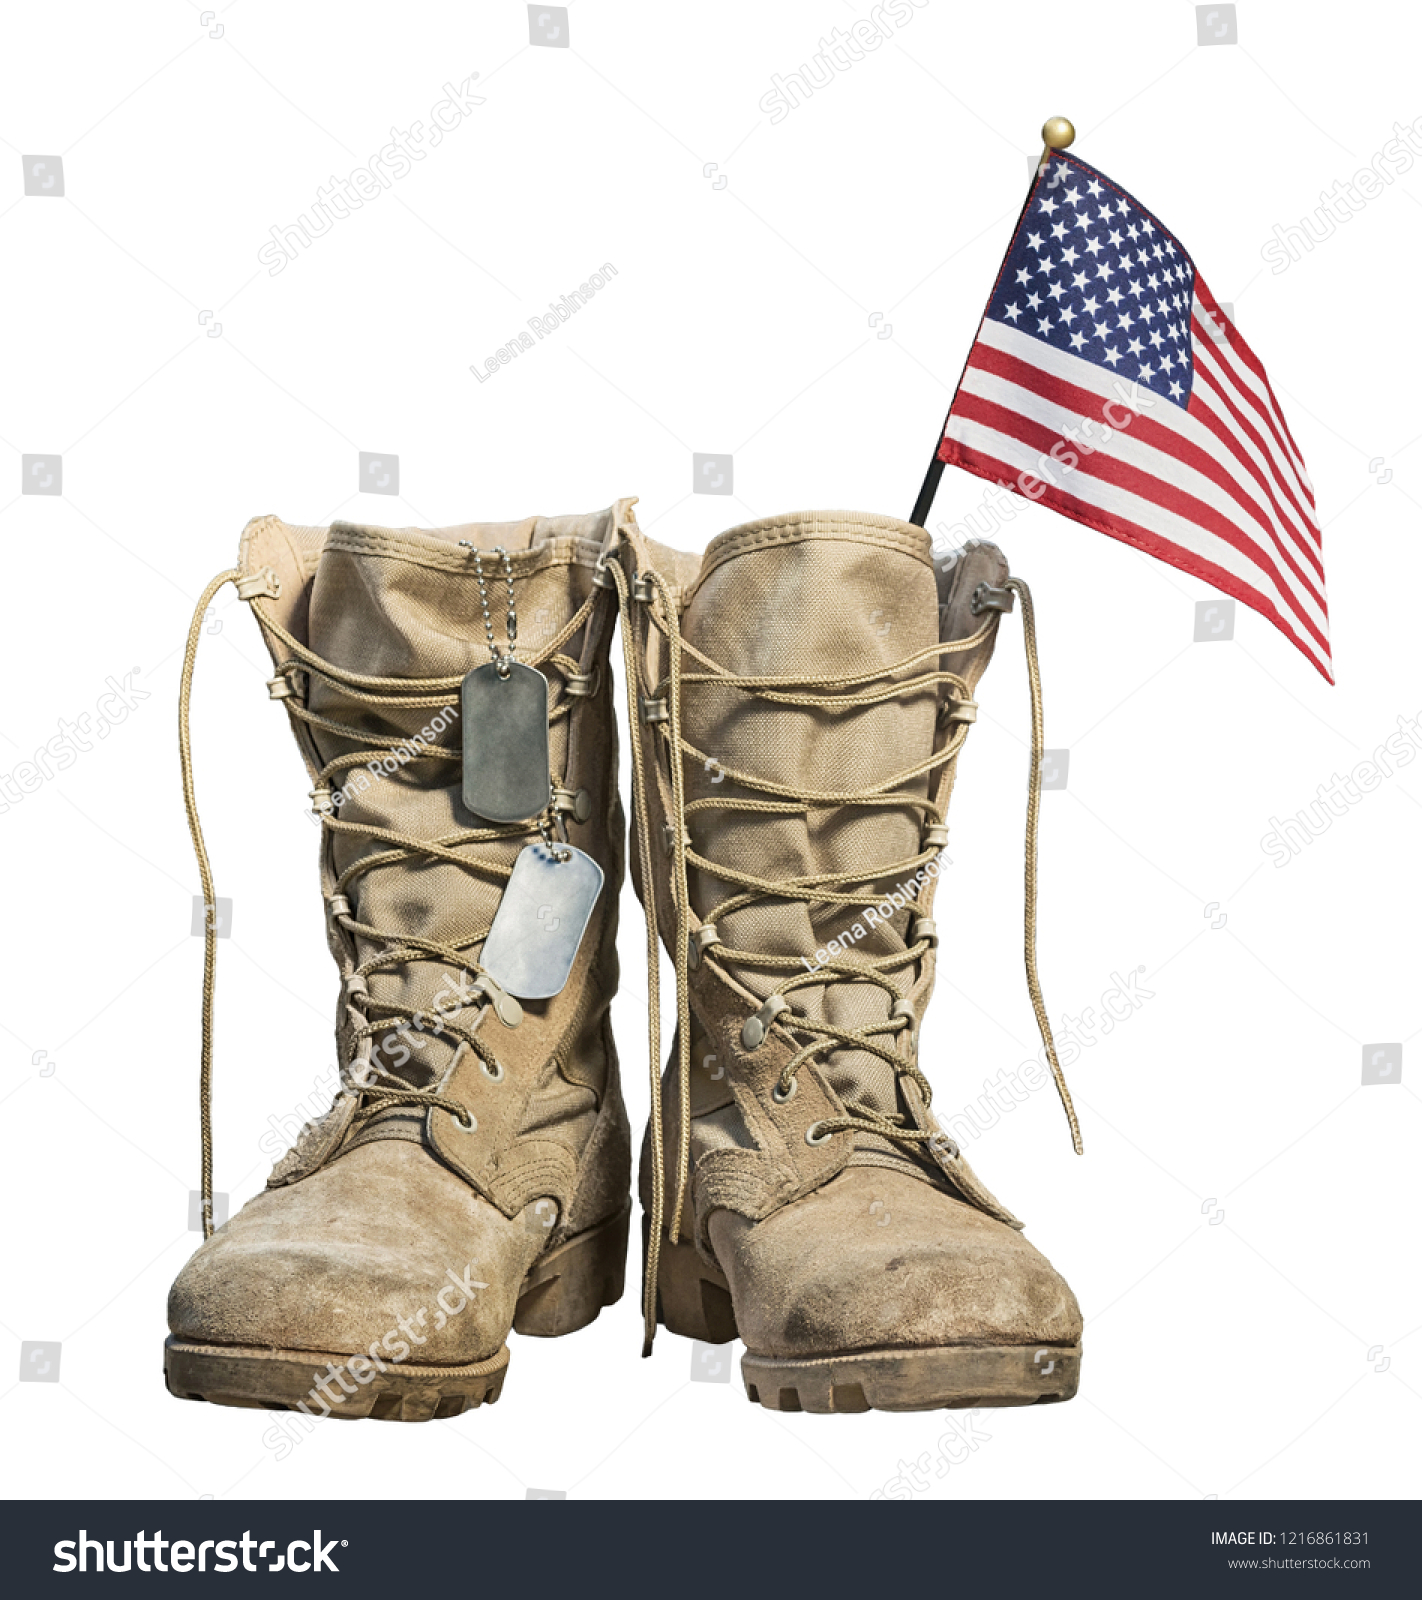 Old military combat boots with the American flag and dog tags, isolated on white background. Memorial Day or Veterans day concept. #1216861831